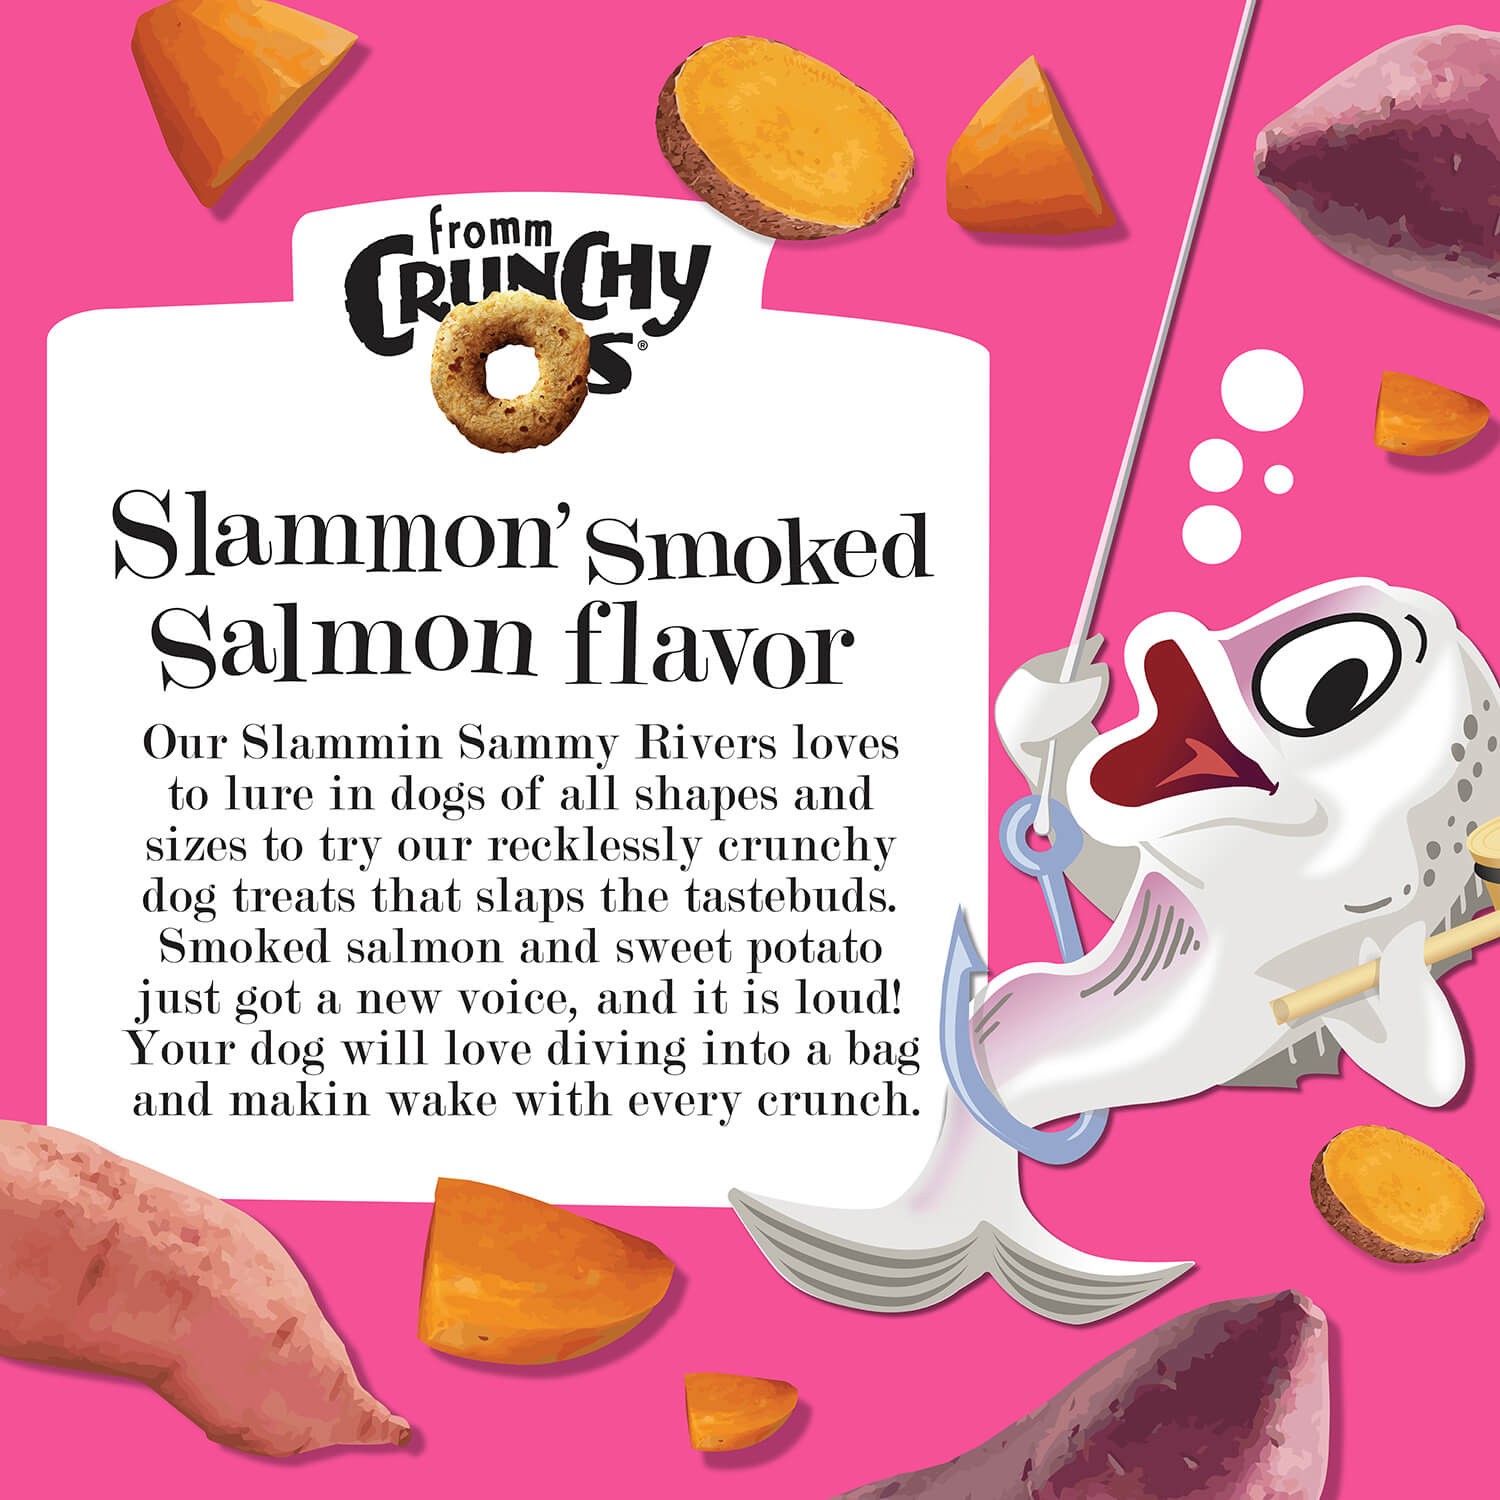 Fromm Crunchy Os Salmmon Smoked Salmon Flavored Dog Treats